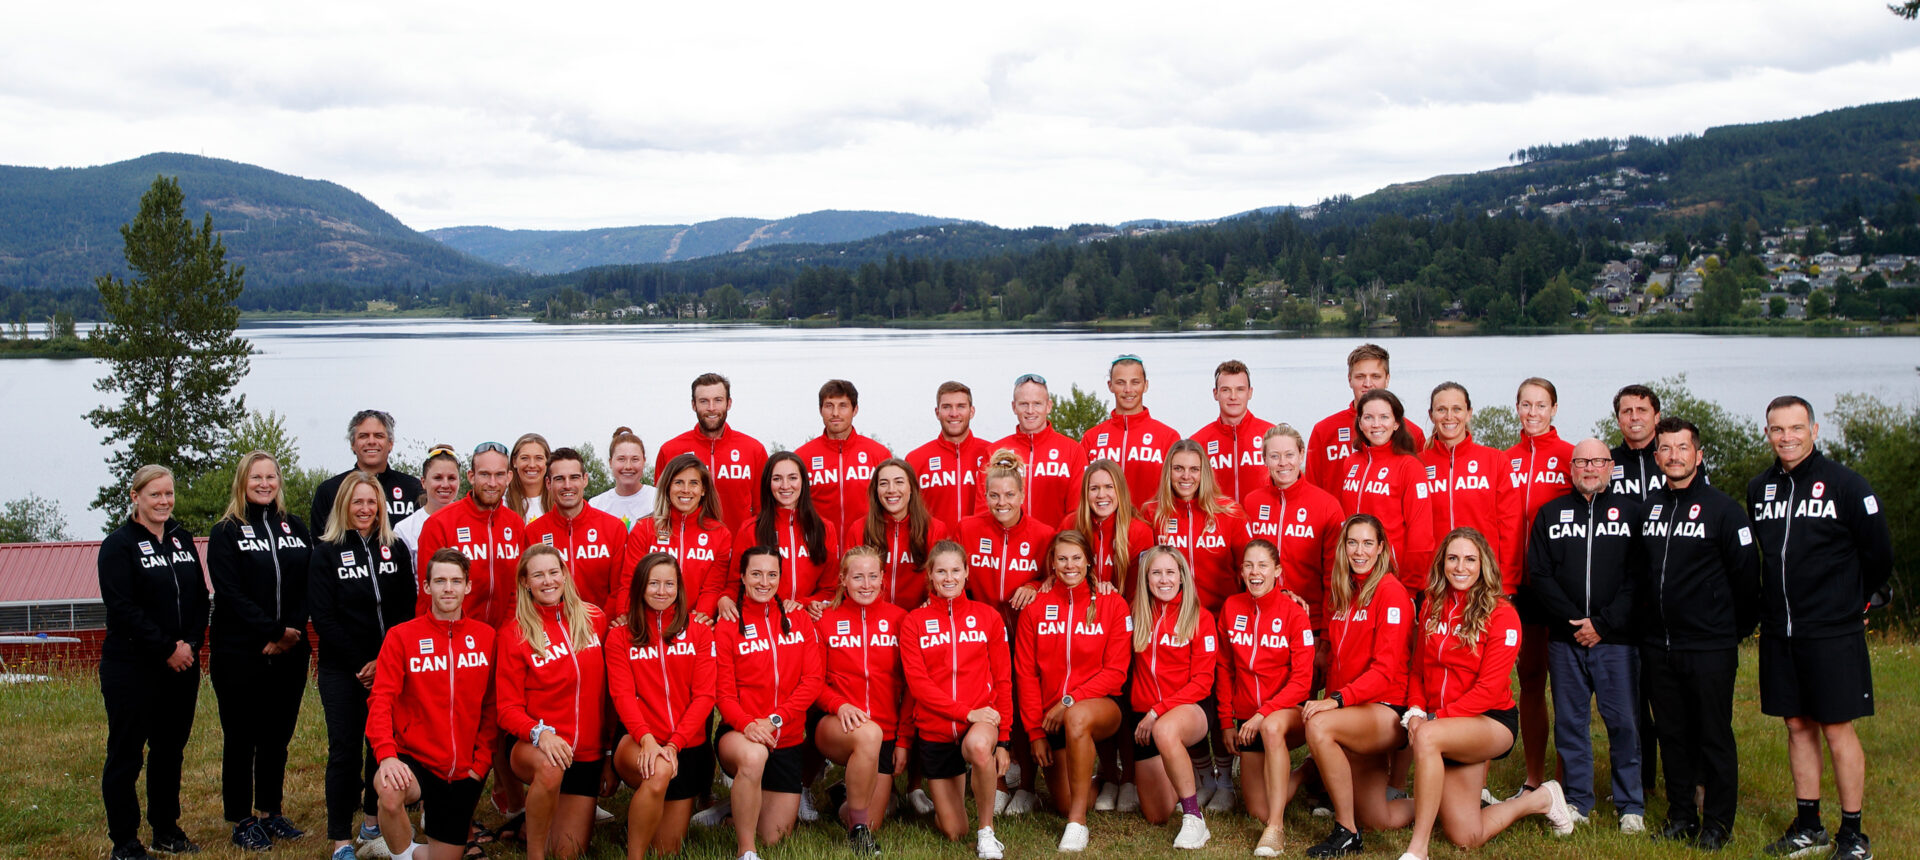 Largest Canadian rowing team in 25 years nominated to represent Team Canada at Tokyo 2020